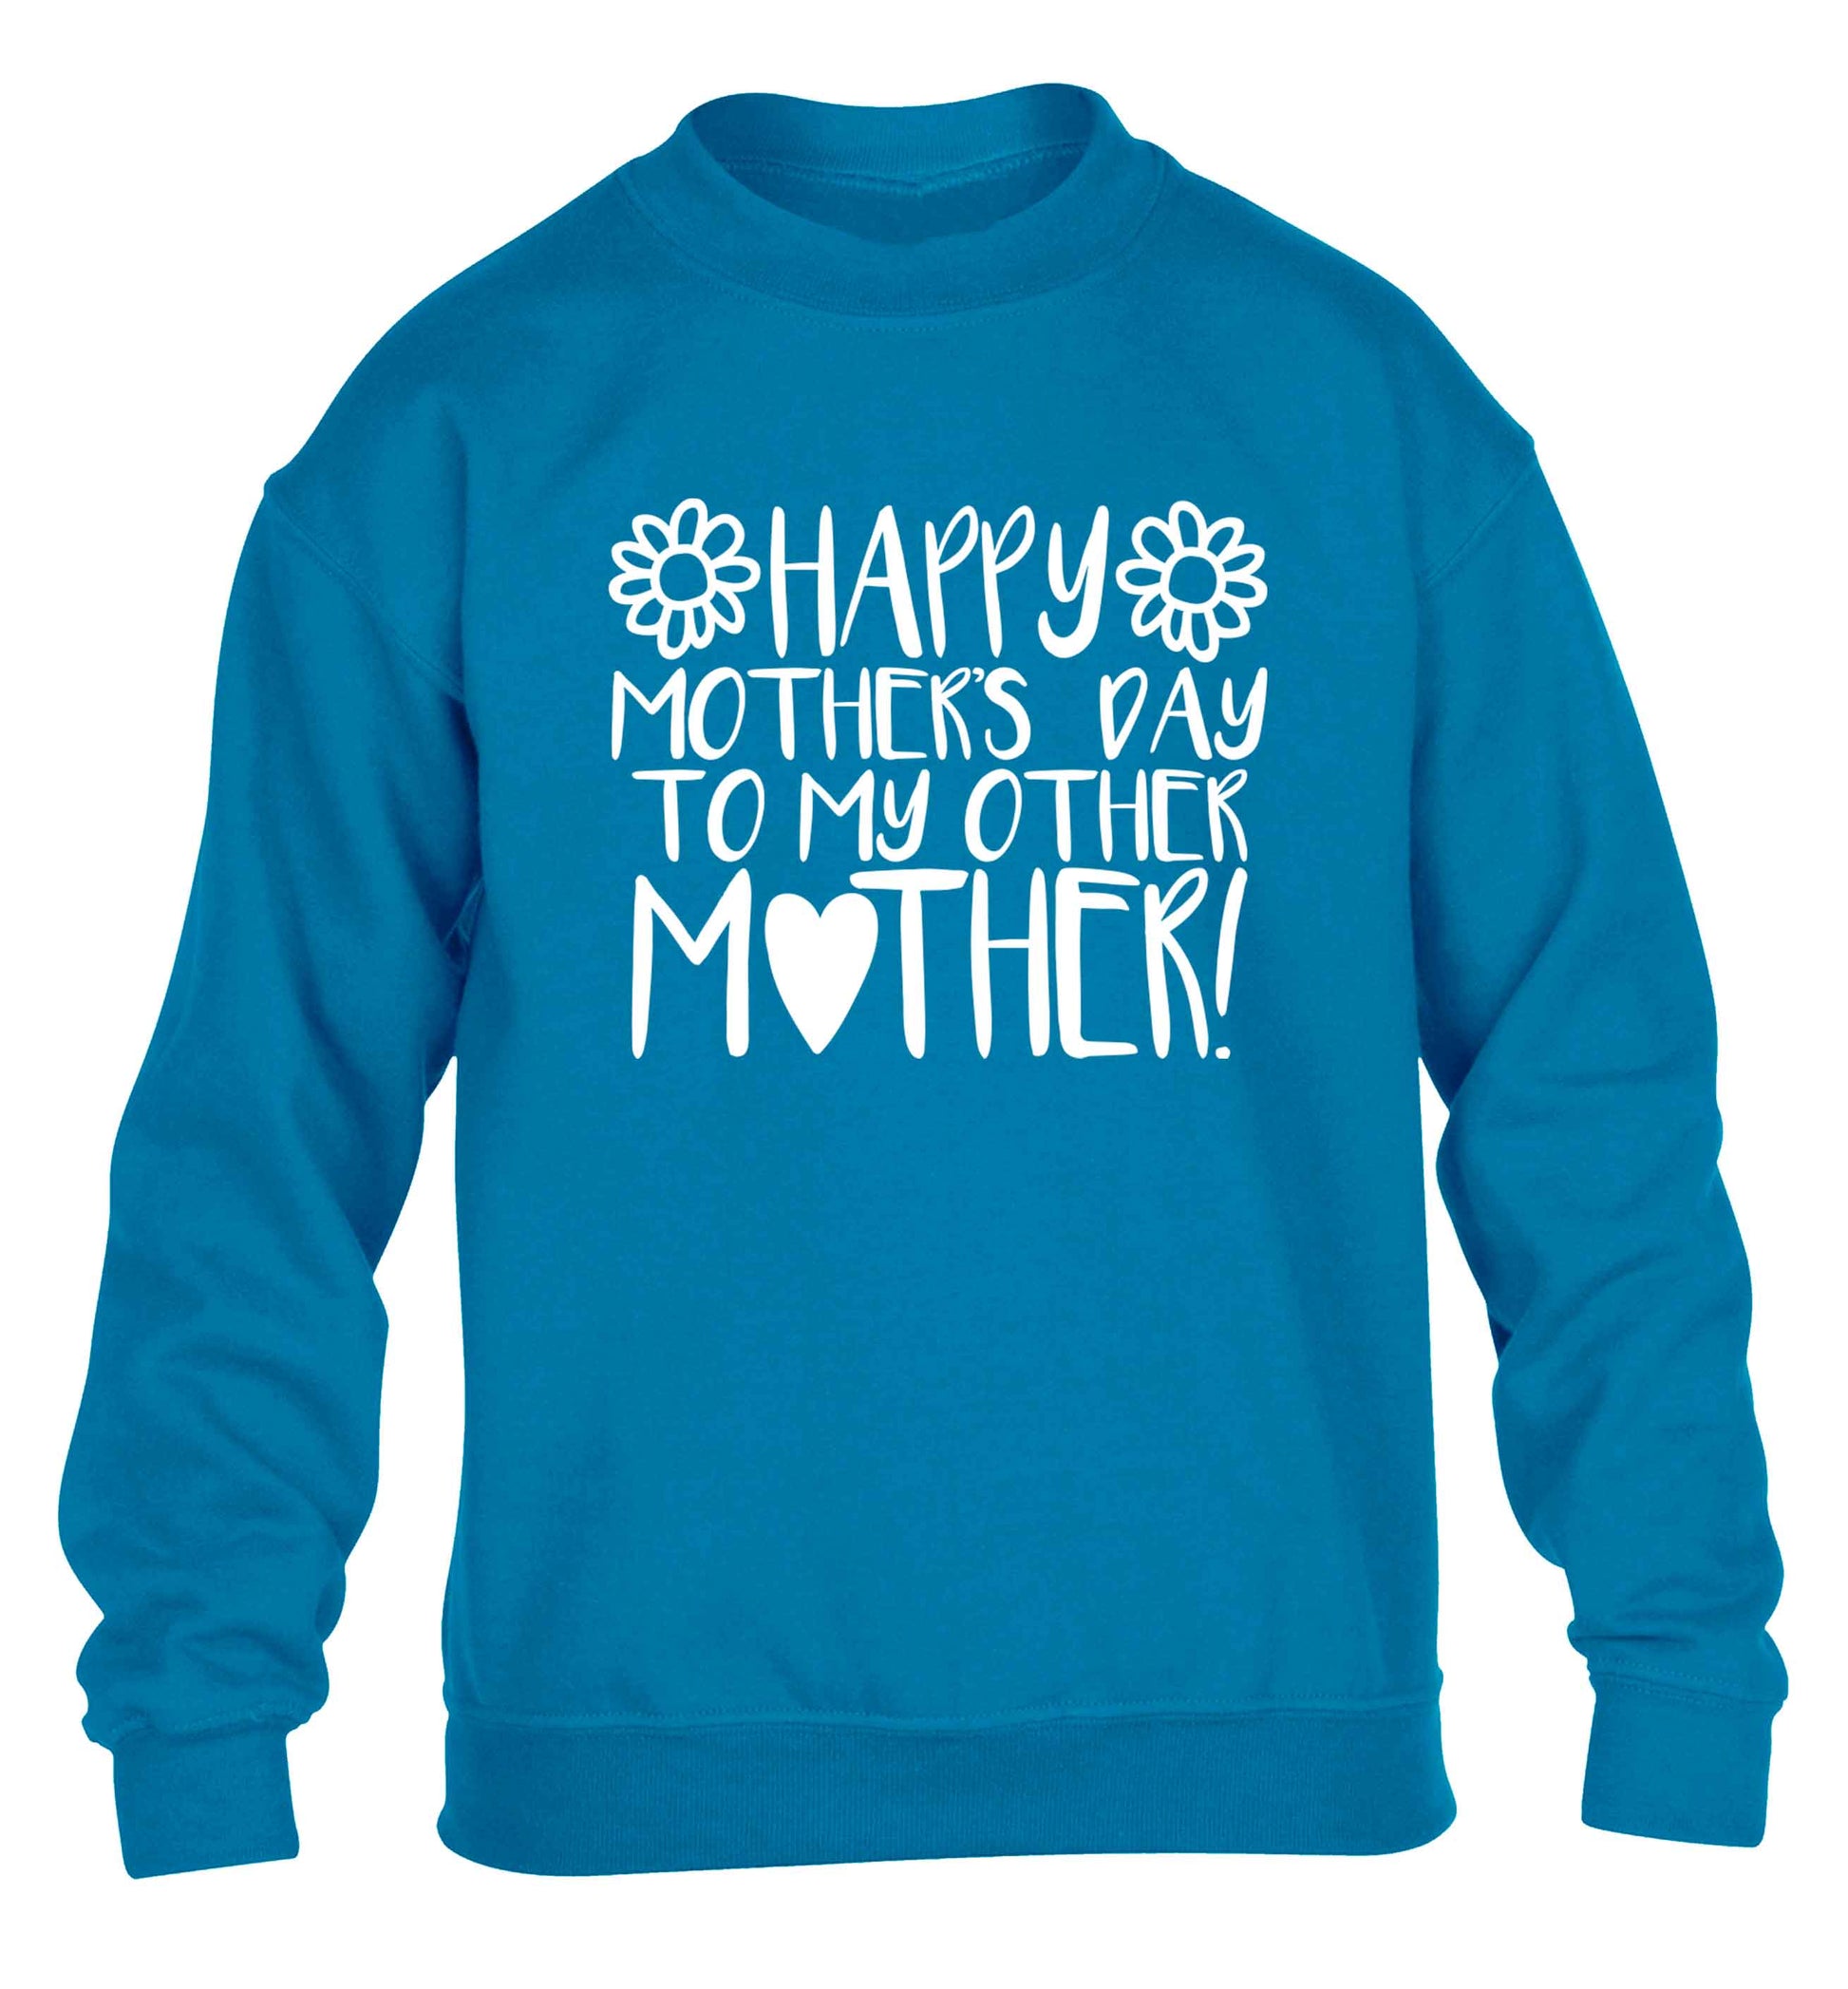 Happy mother's day to my other mother children's blue sweater 12-13 Years